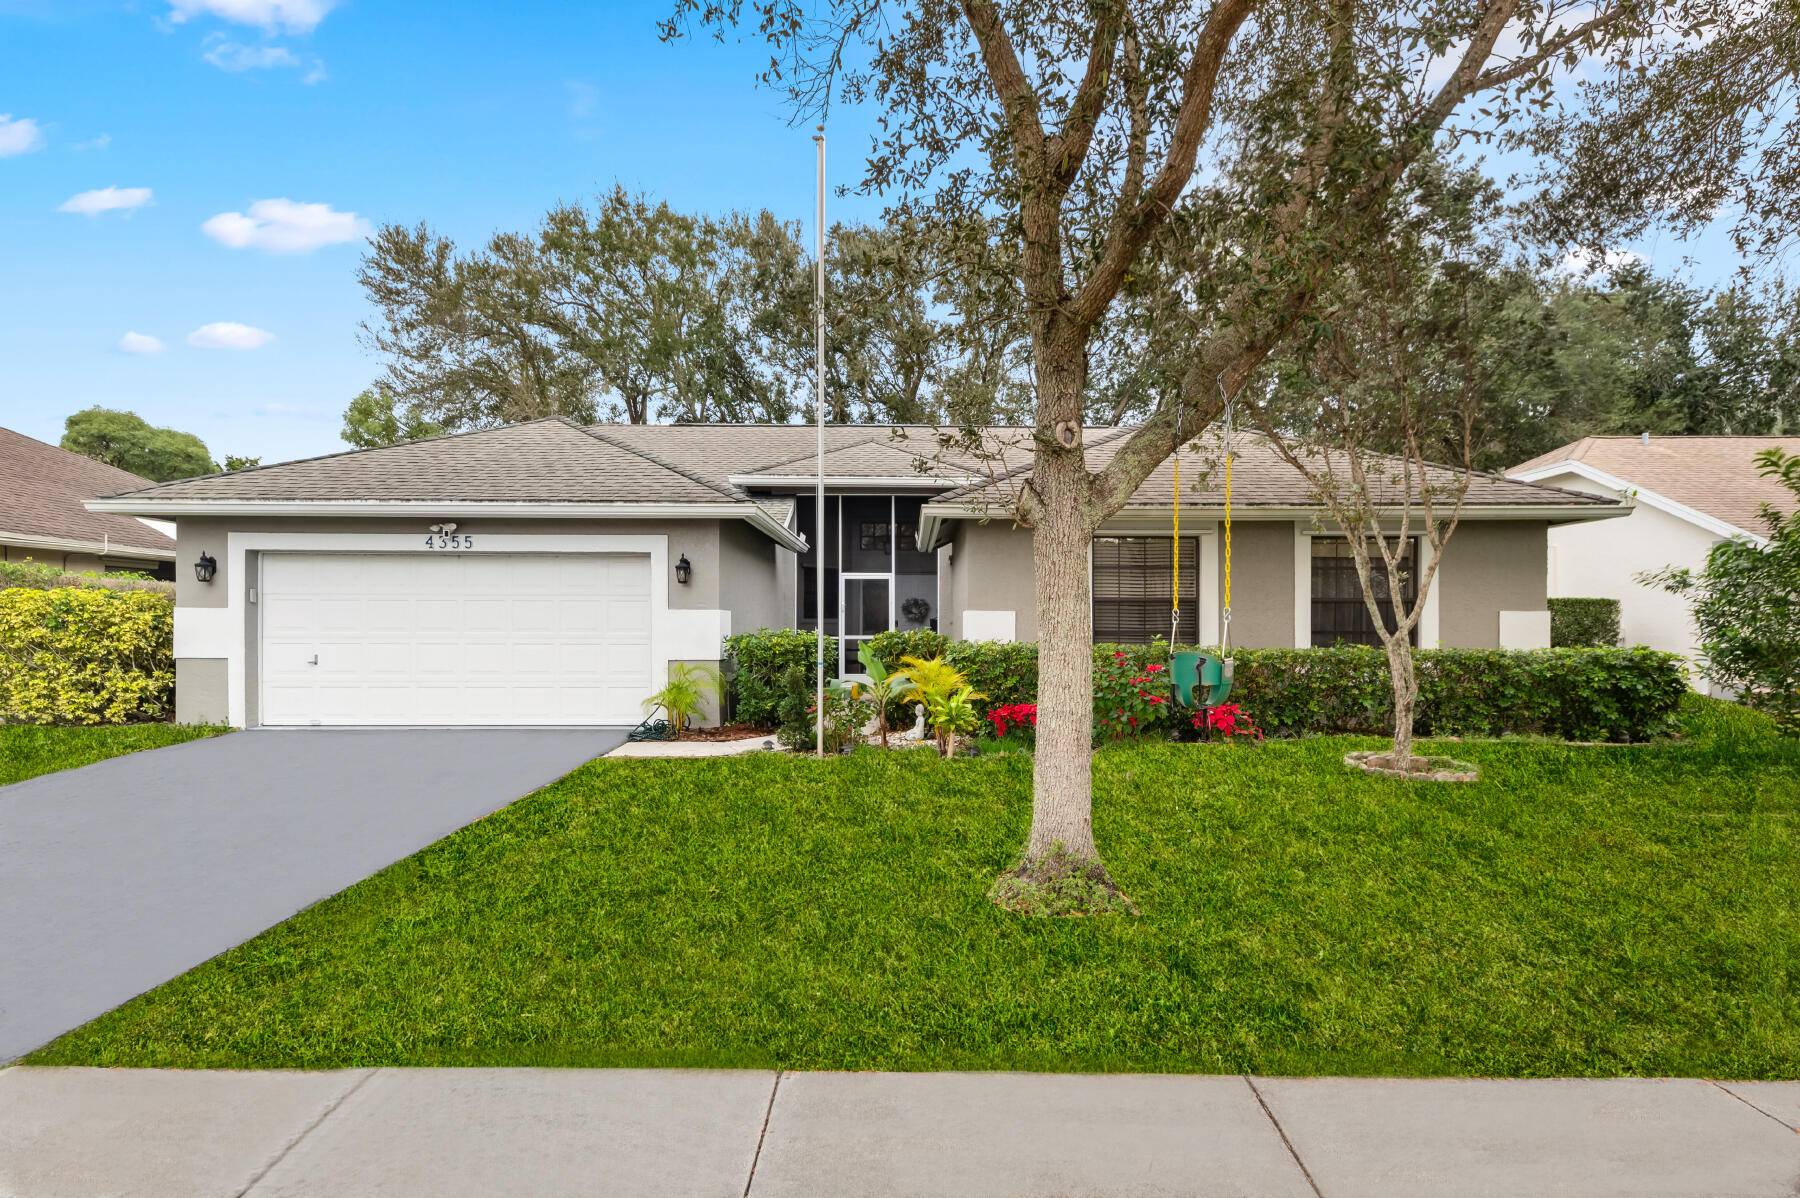 Welcome to this beautiful 4 bedroom 2 bath completely remodeled Single Family Home in the very sought after Winston Park area.